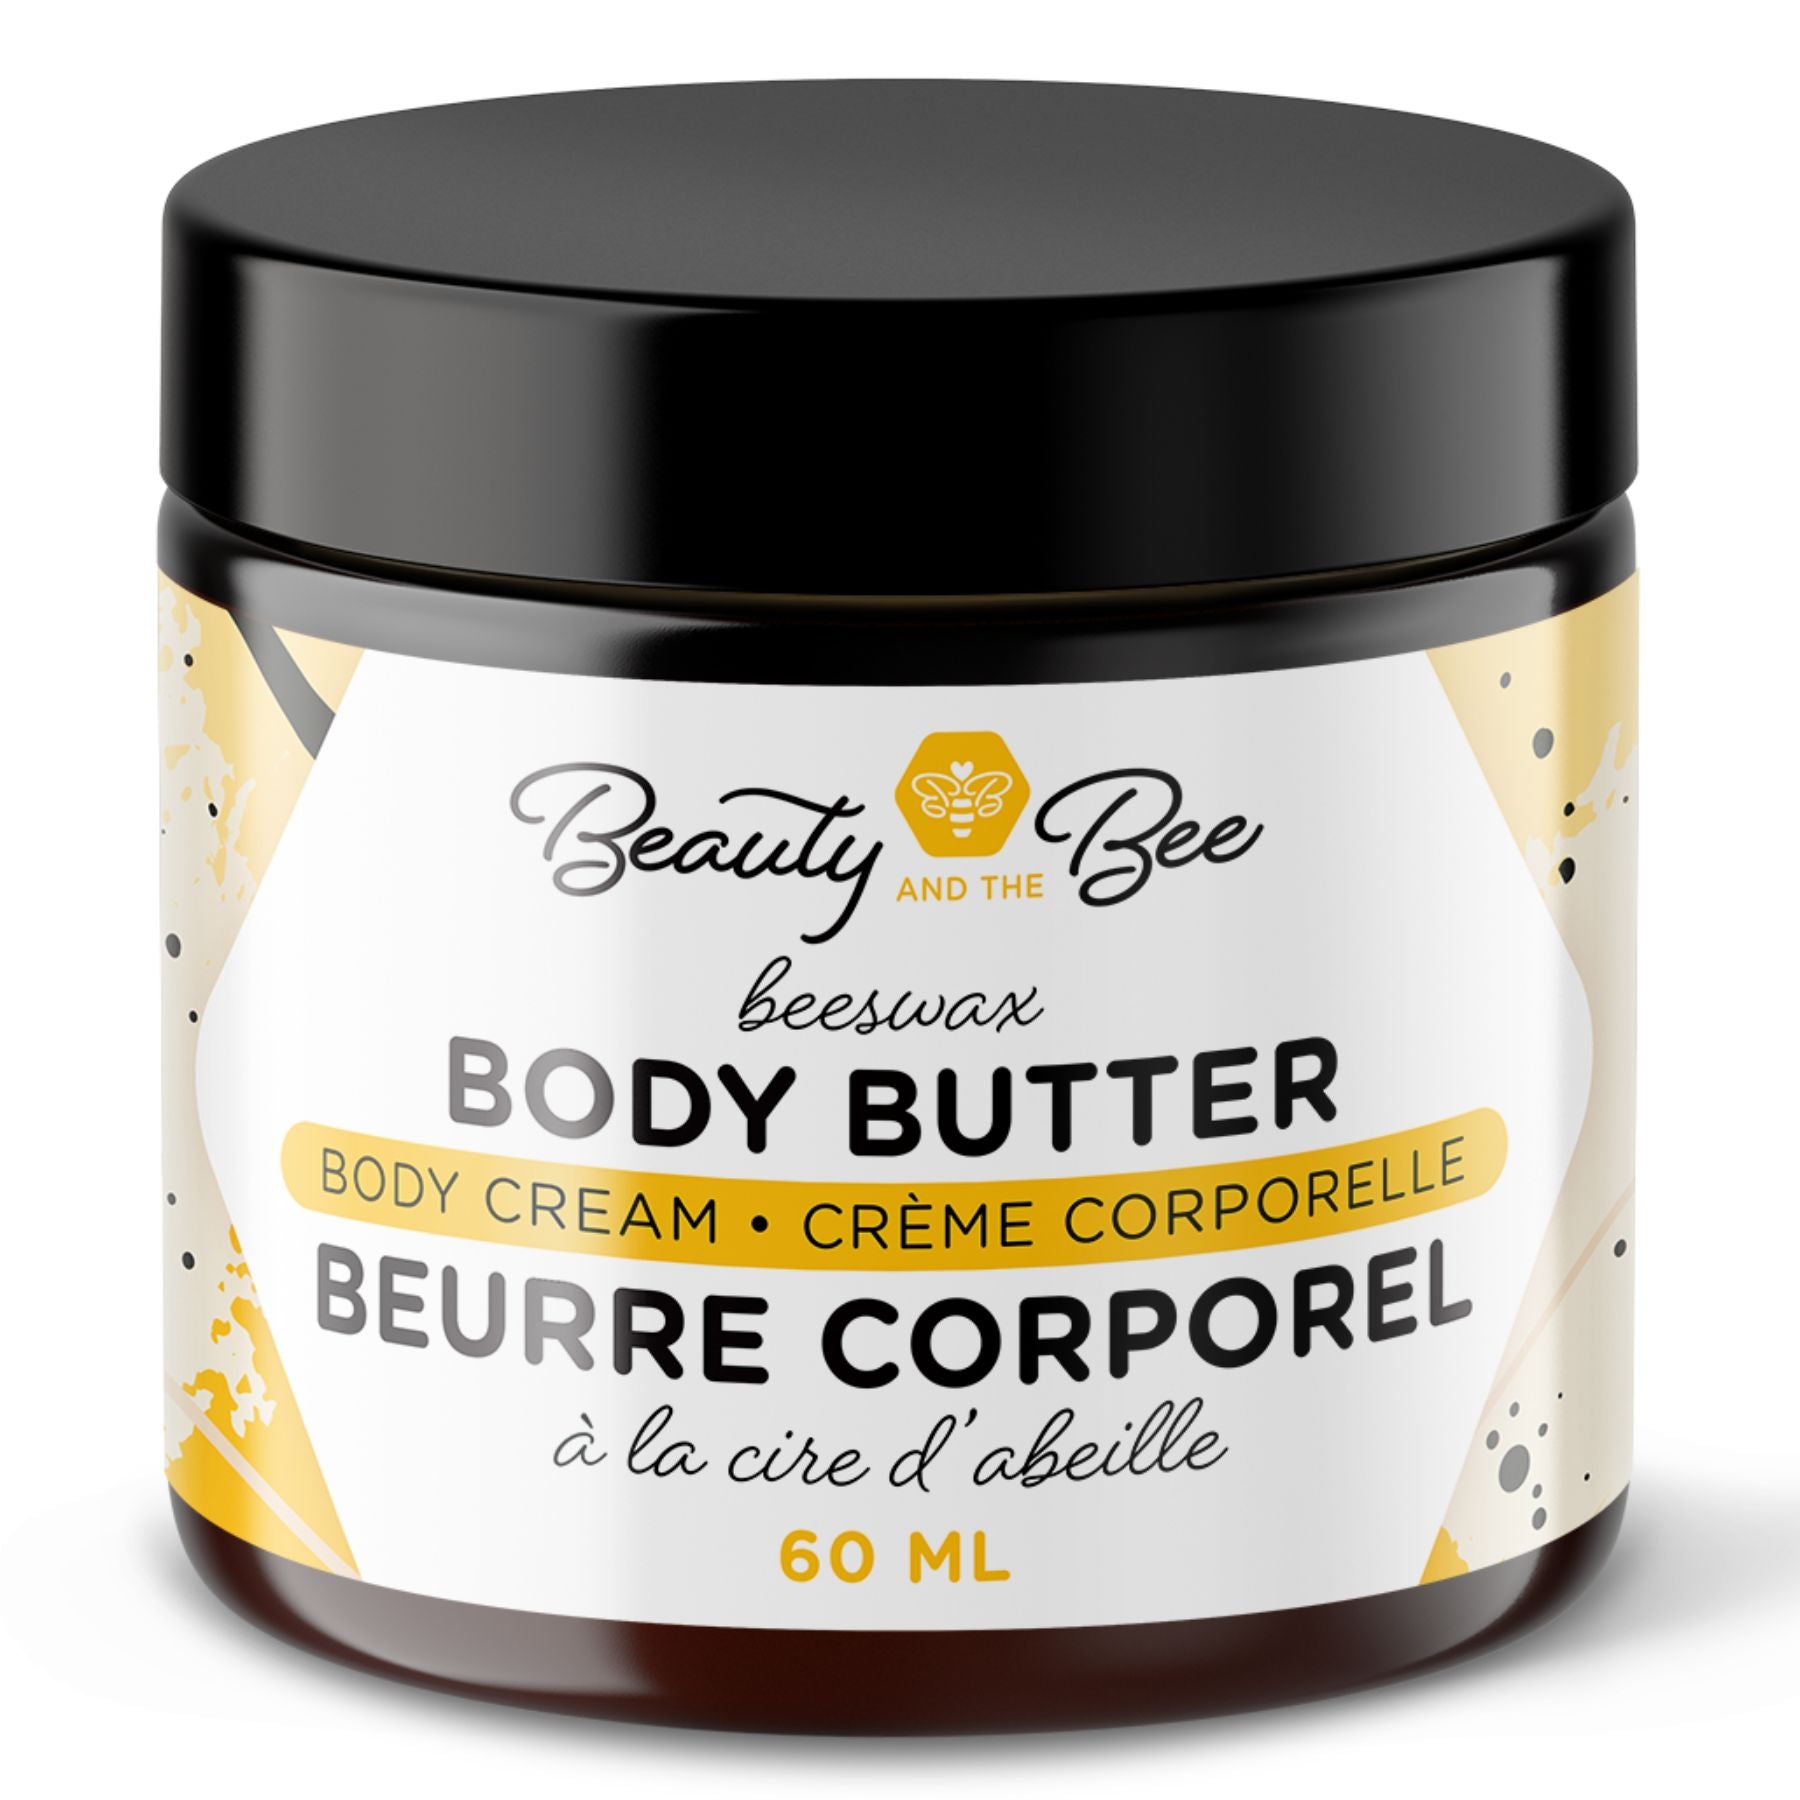 Dutchman's Gold Beauty and the Bee Body Butter 60ml